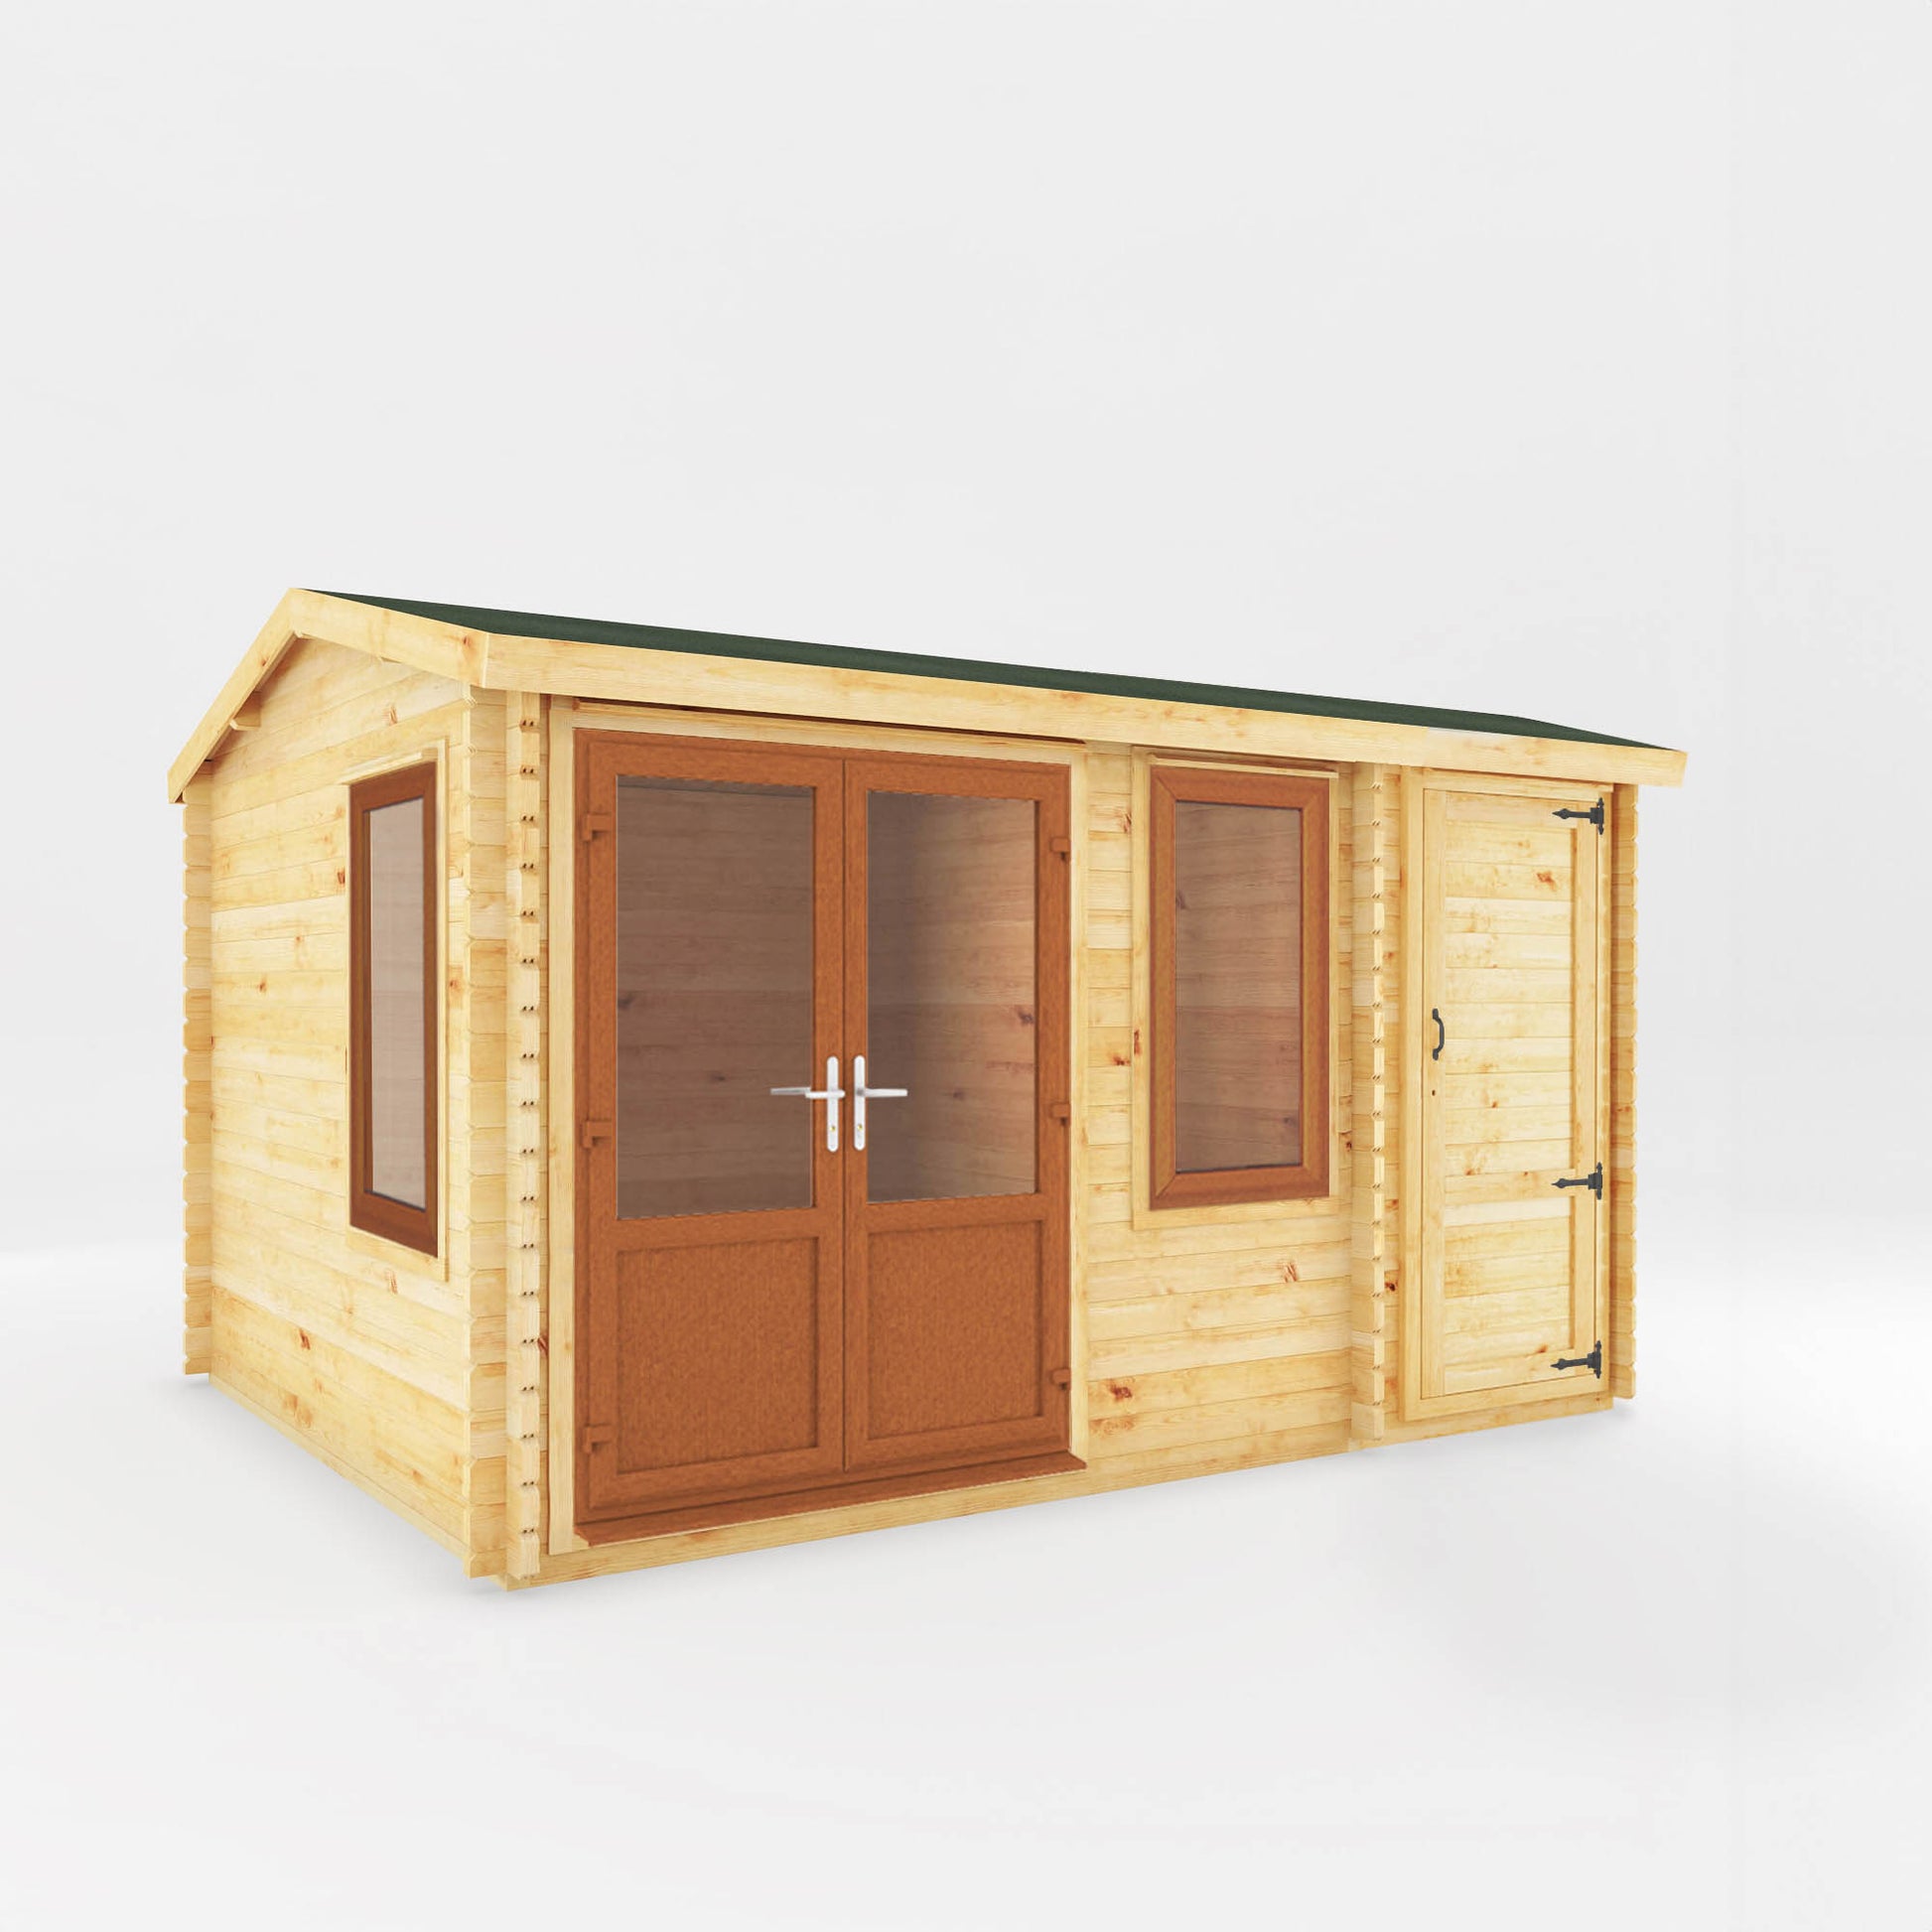 A timber log cabin with double doors, apex roof, side shed and large windows with oak UPVC